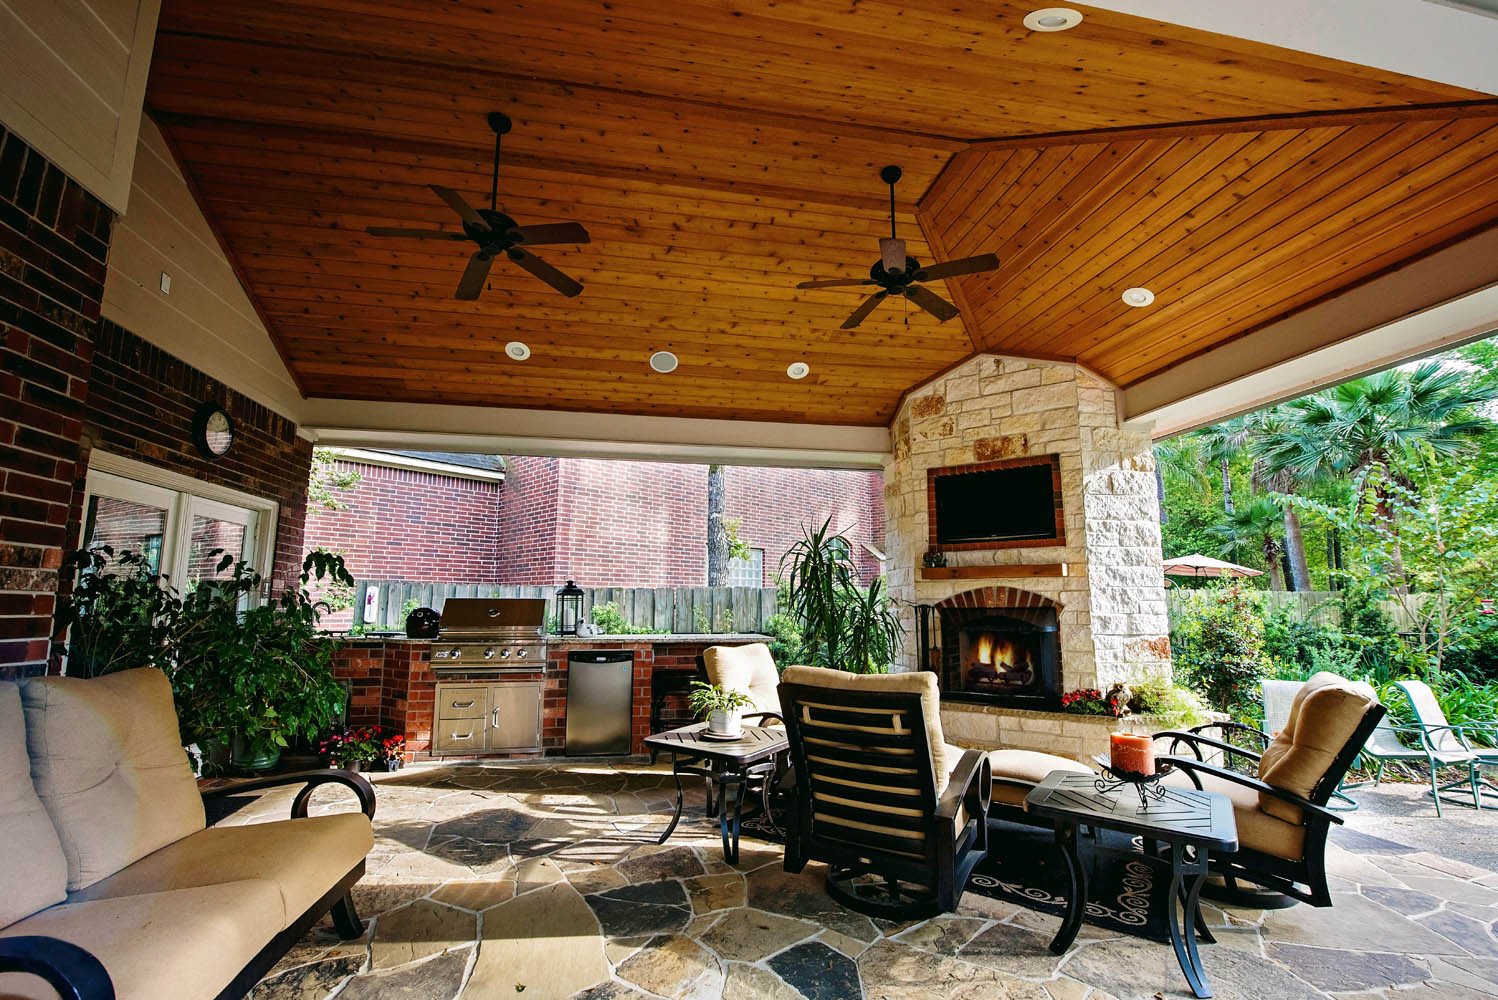 Outdoor Kitchen With Fireplace
 Houston Outdoor kitchens Spring s